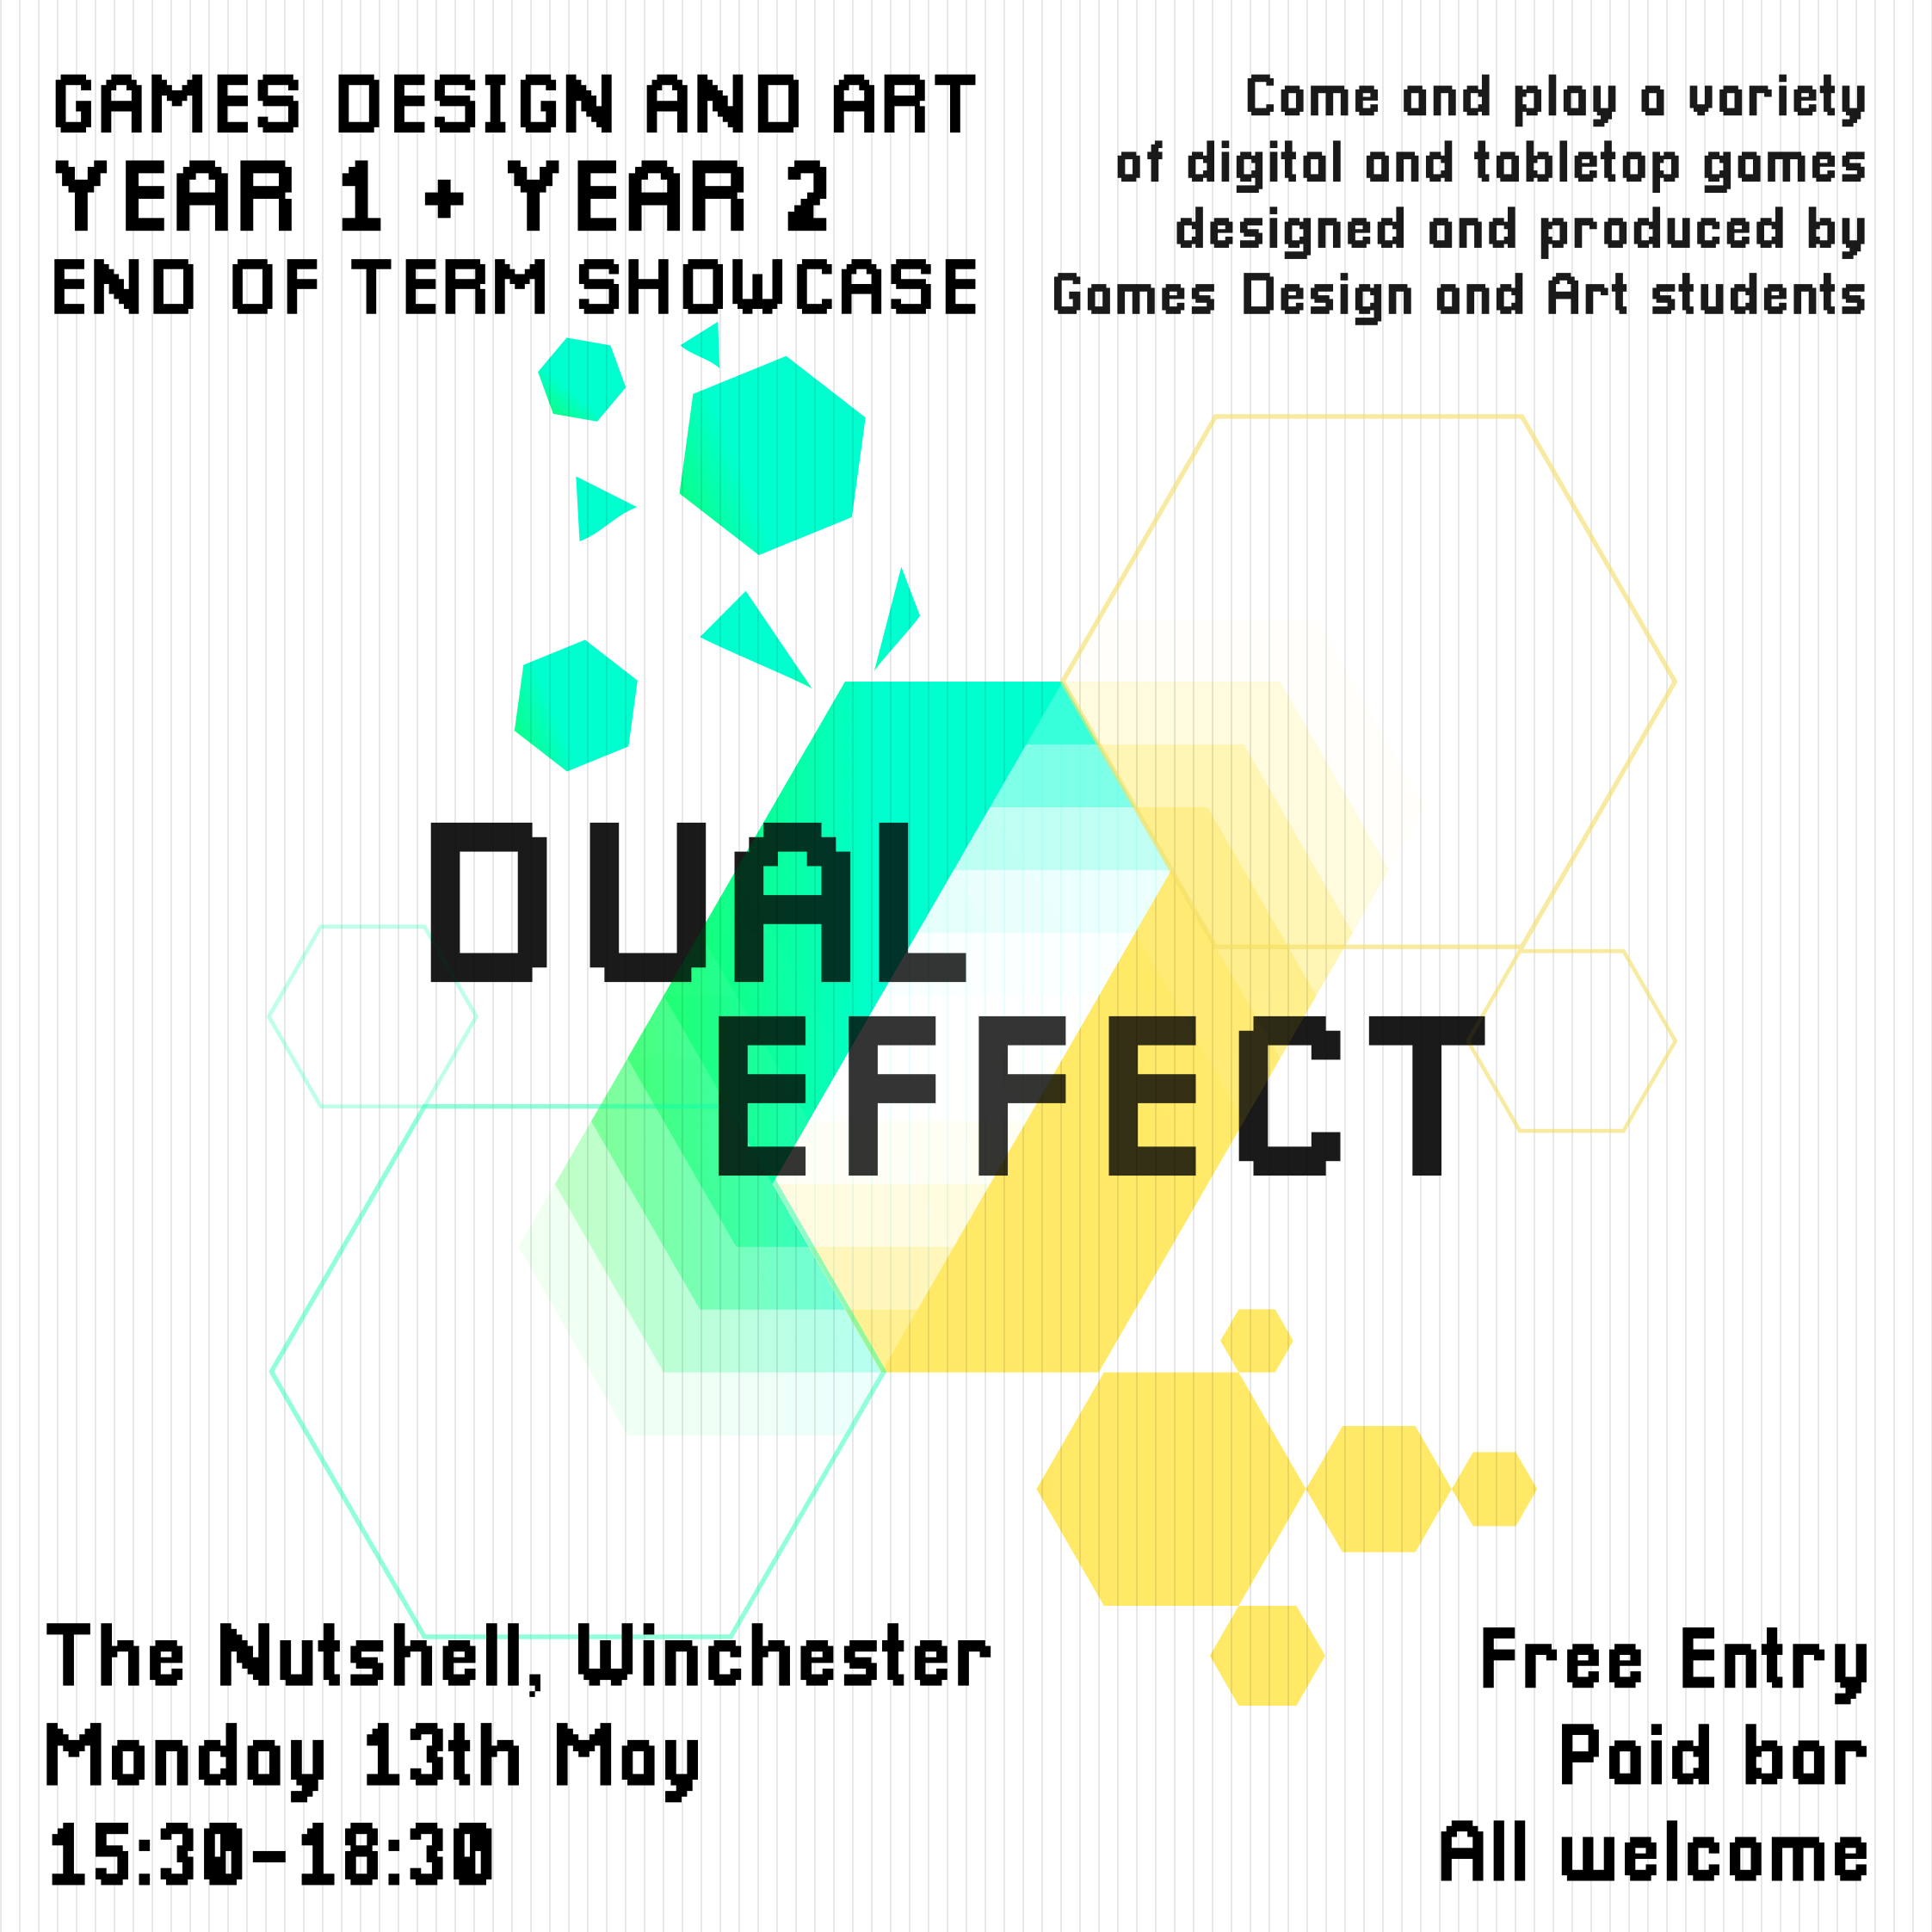 Poster advertising games event on 13th from 15:30-18:30 in the Nutshell Winchester, UK